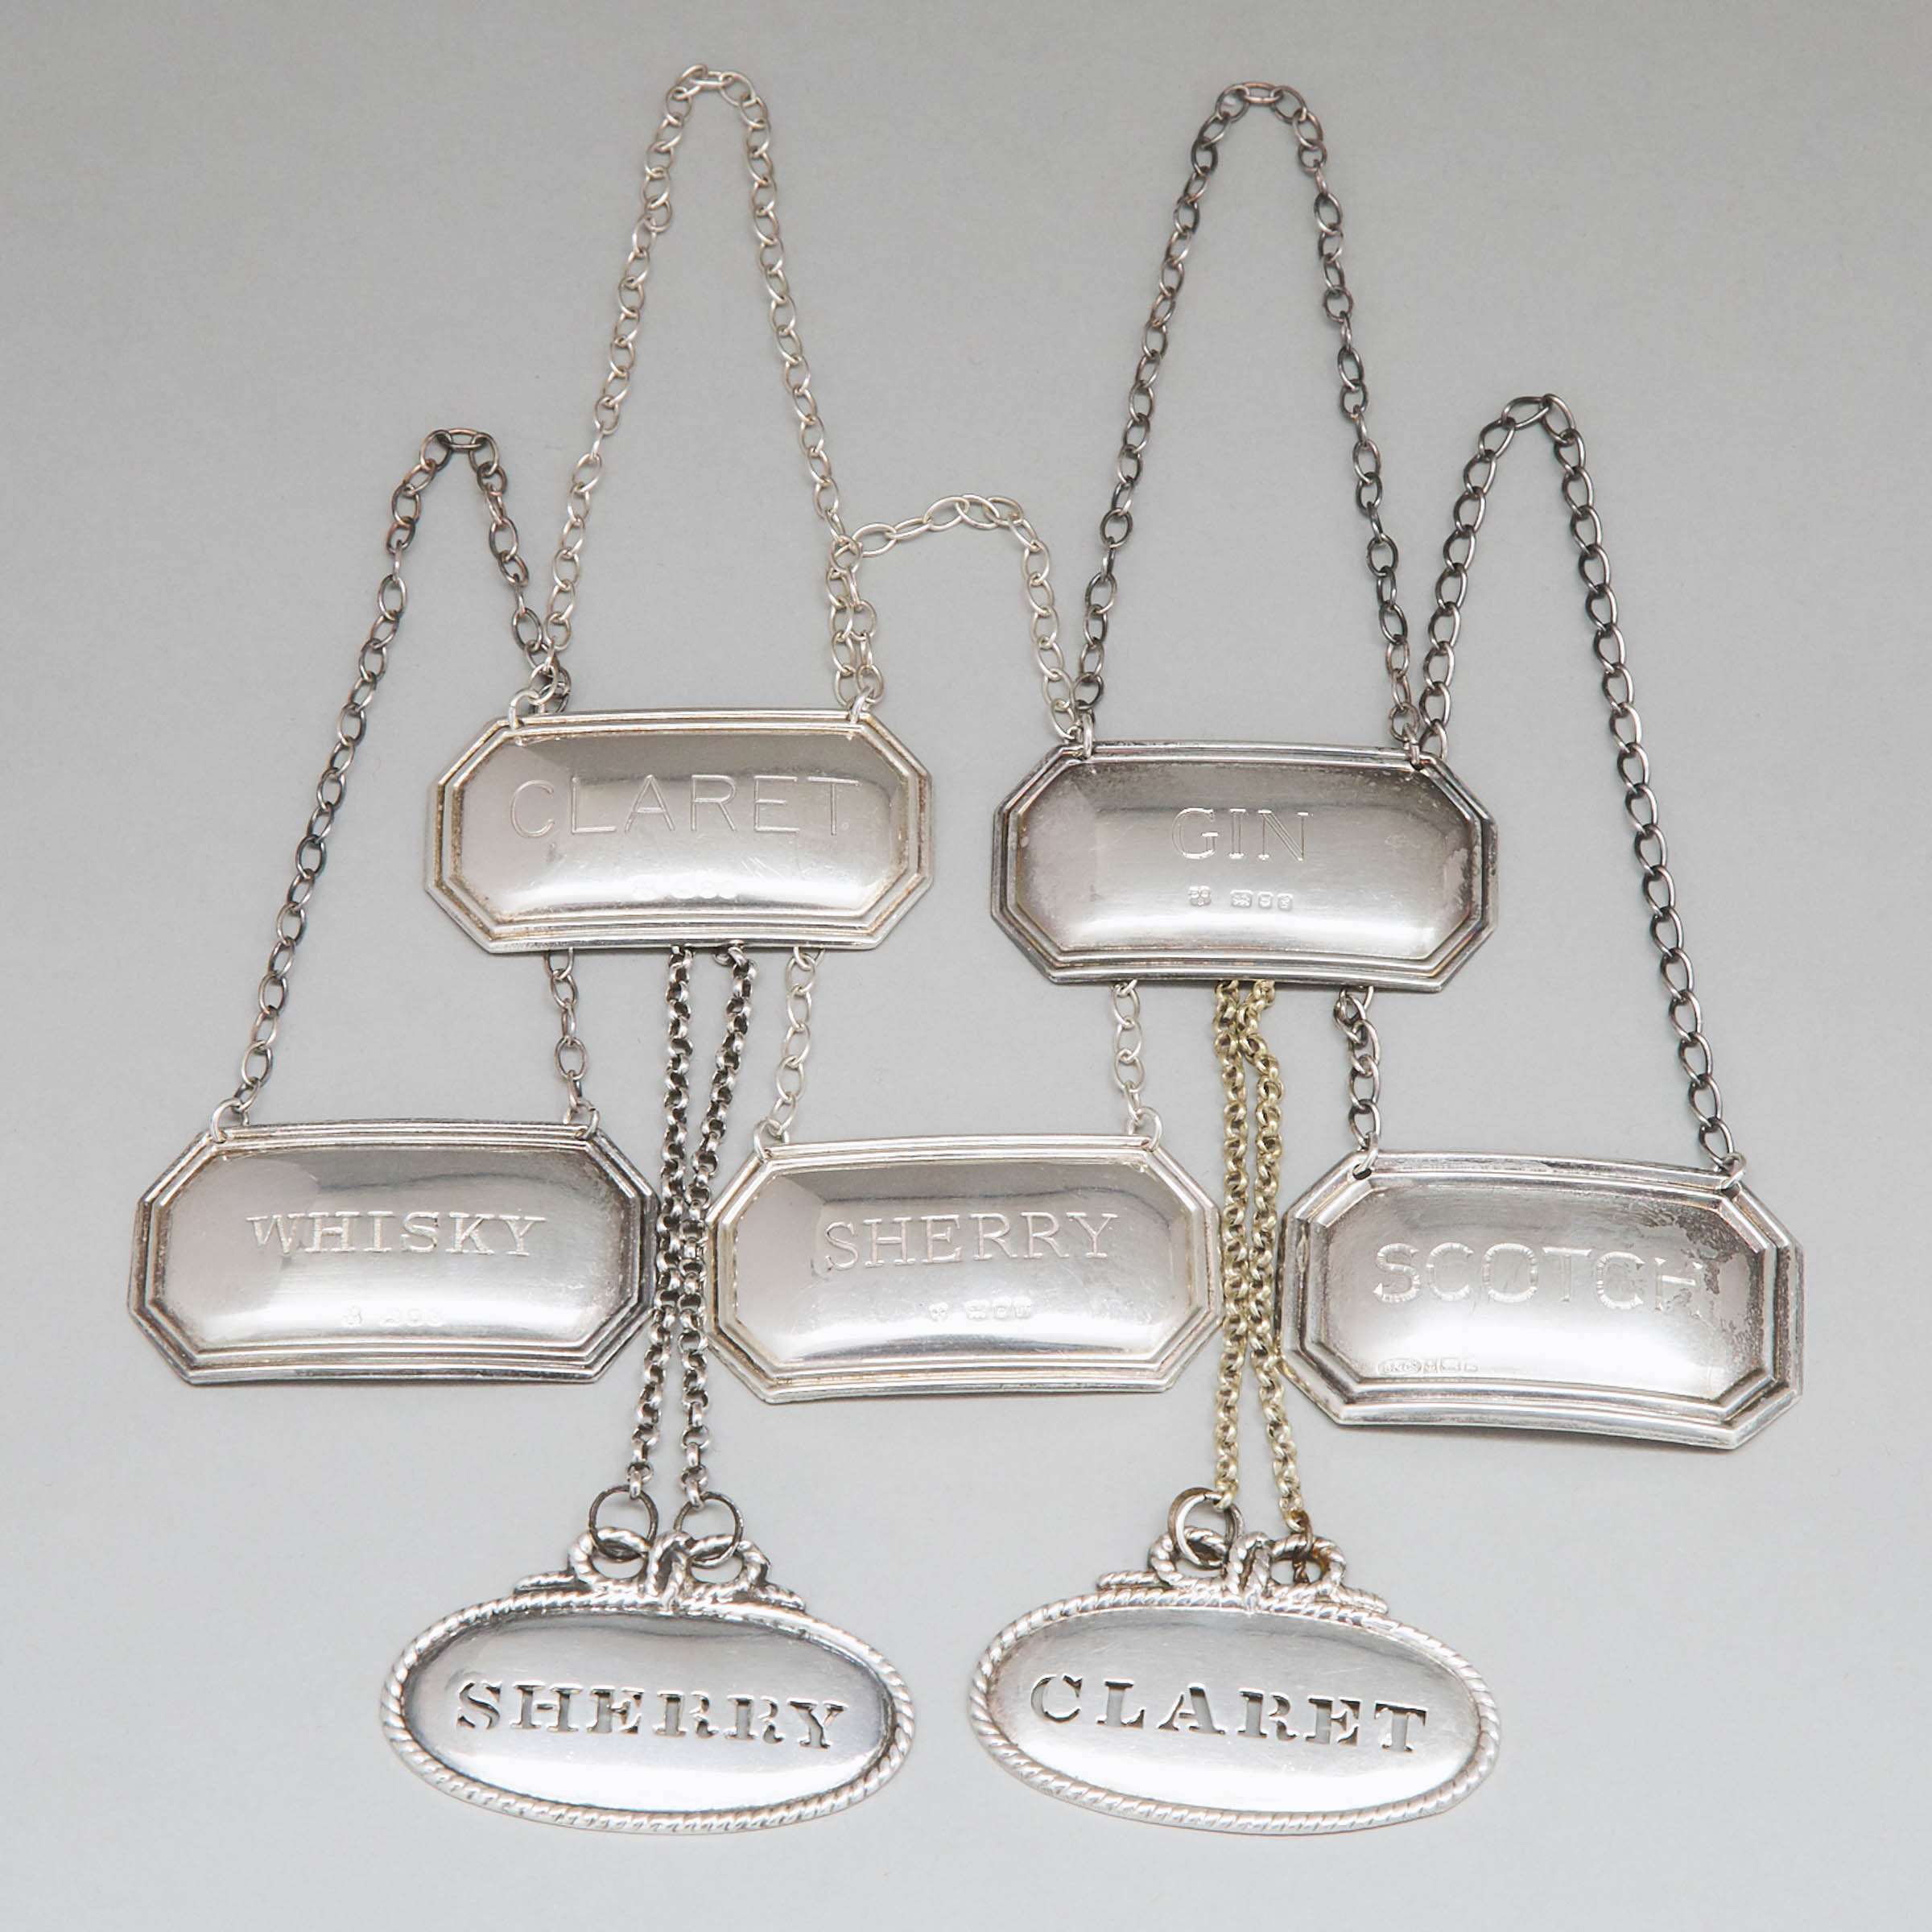 Seven Mainly English Silver Wine Labels, 20th century